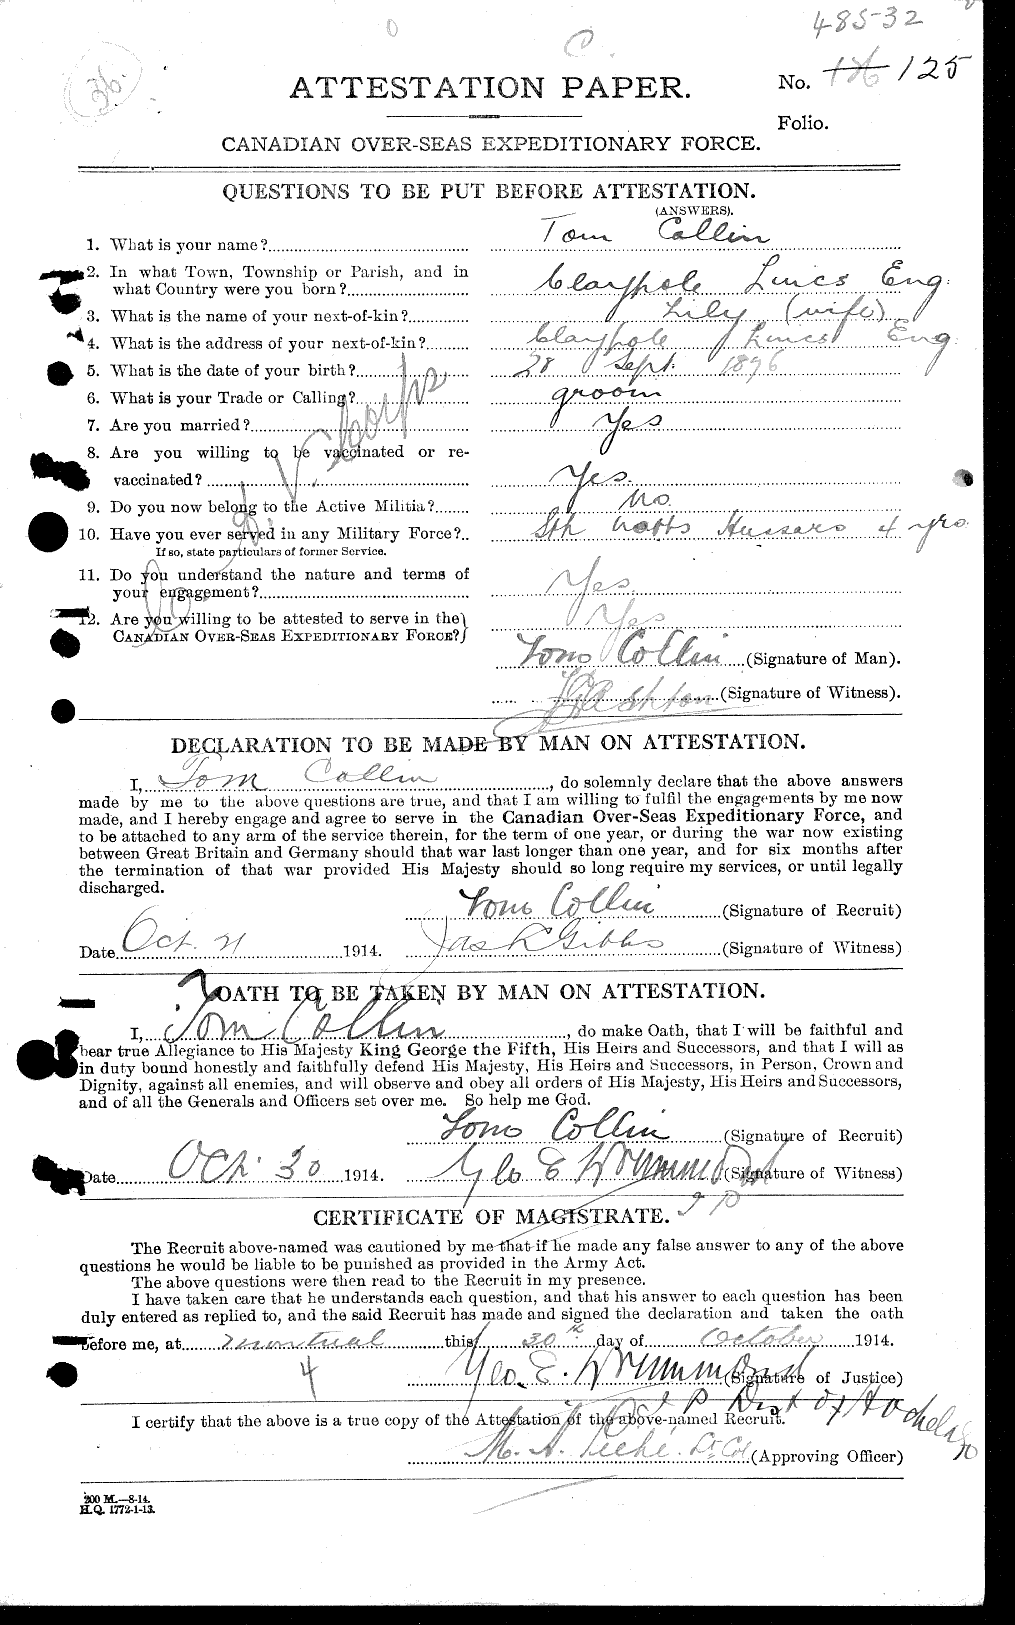 Personnel Records of the First World War - CEF 034566a